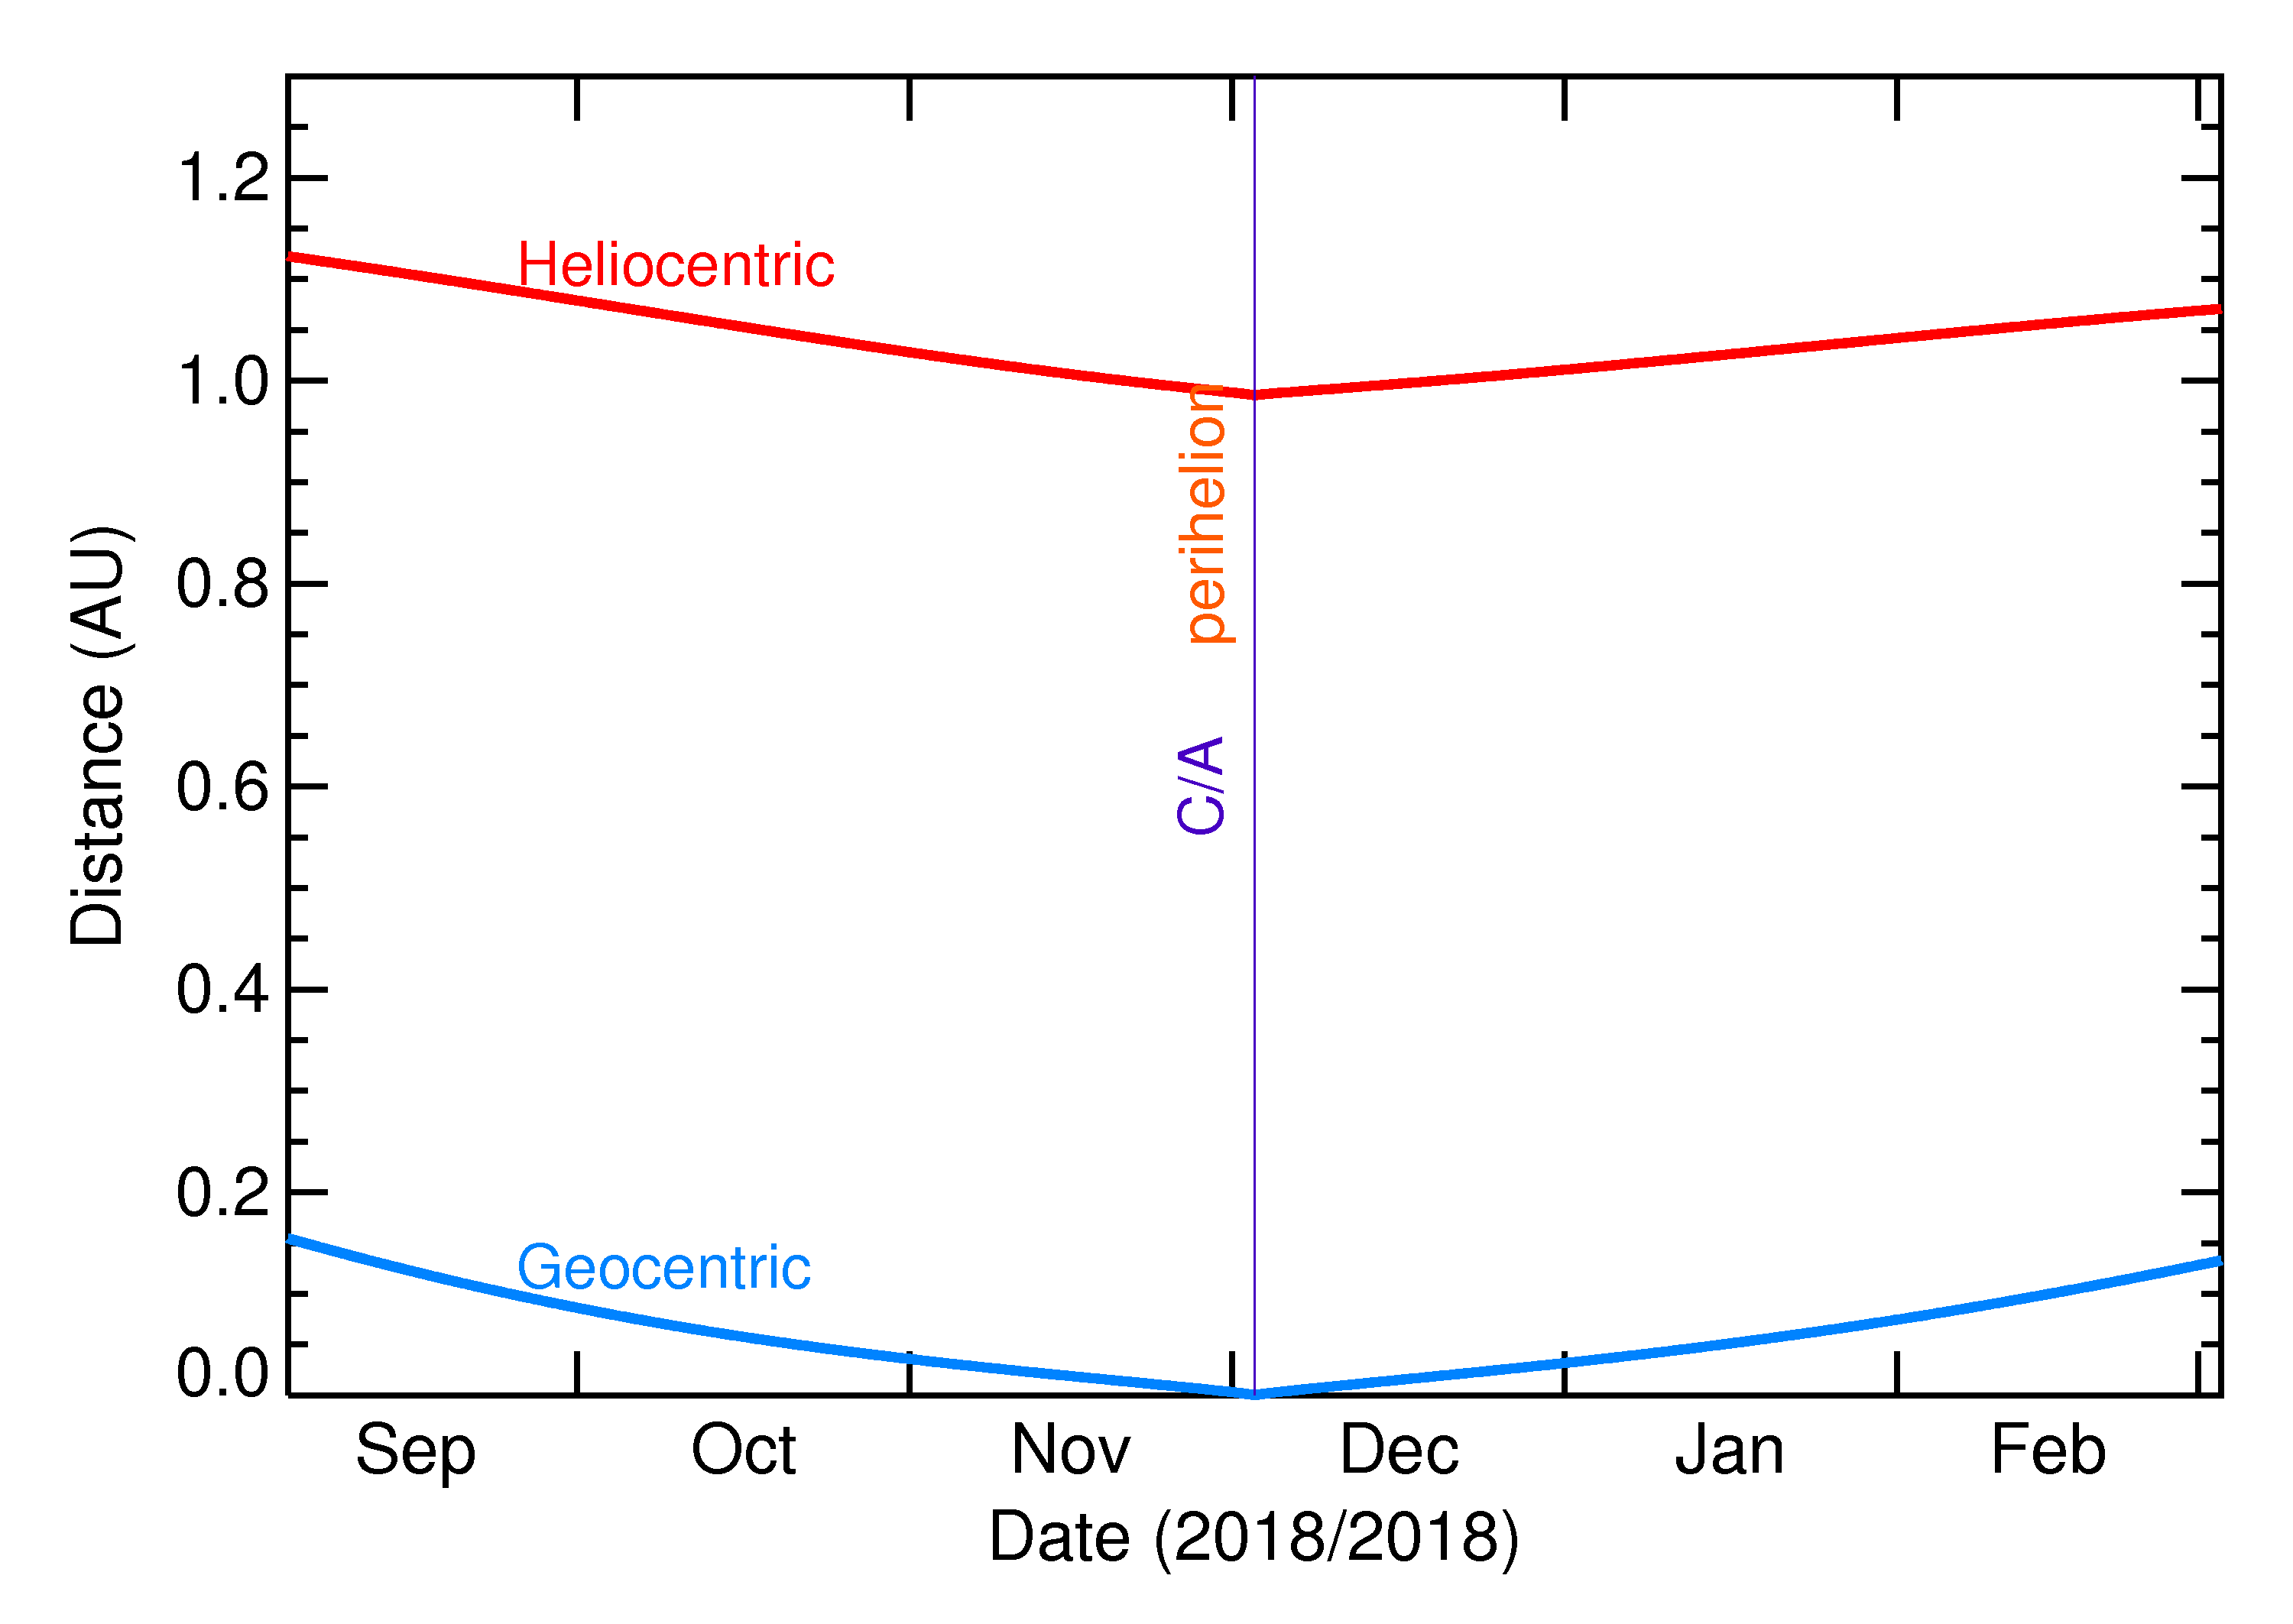 Heliocentric and Geocentric Distances of 2018 WV1 in the months around closest approach